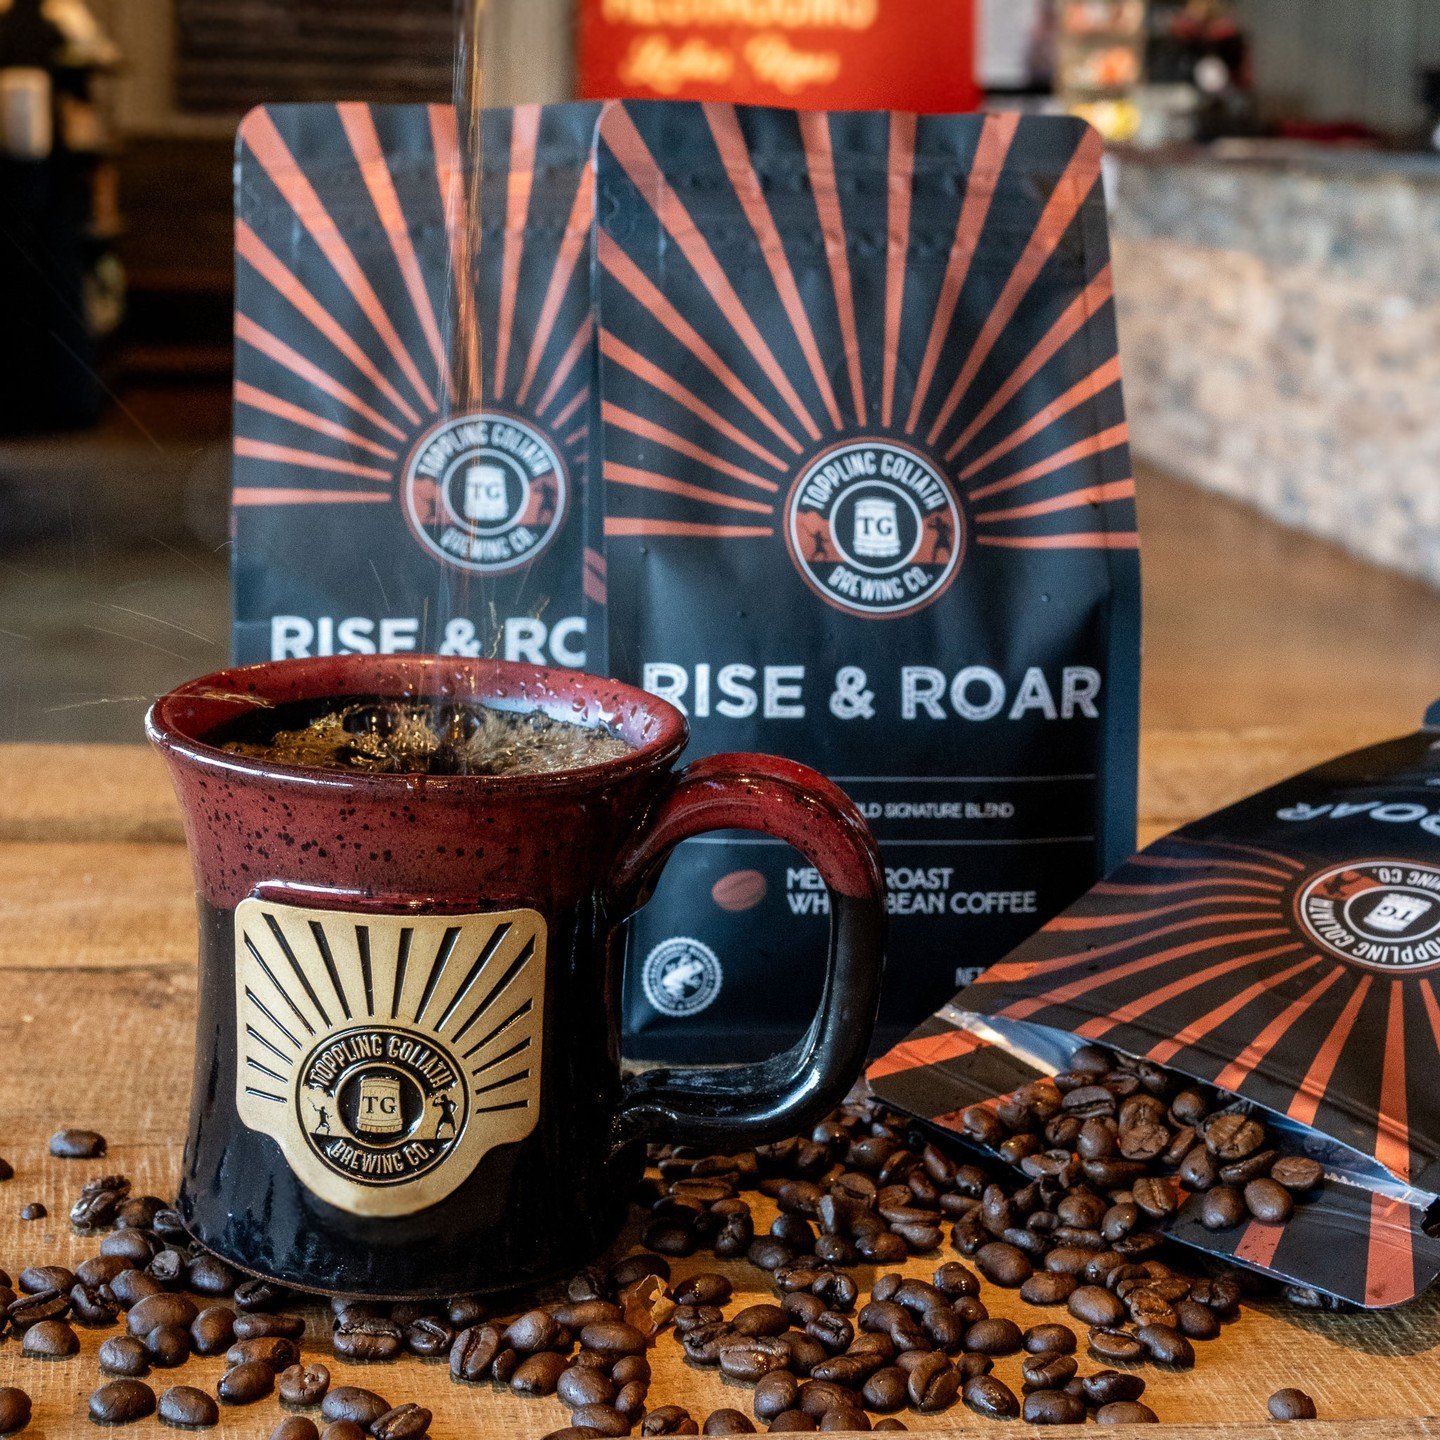 Start your Tuesday off right with our Signature House Blend coffee, Rise &amp; Roar!☕ 

We joined forces with @verenastreet to create this bold, but smooth medium roast coffee that will be sure to brighten your day!